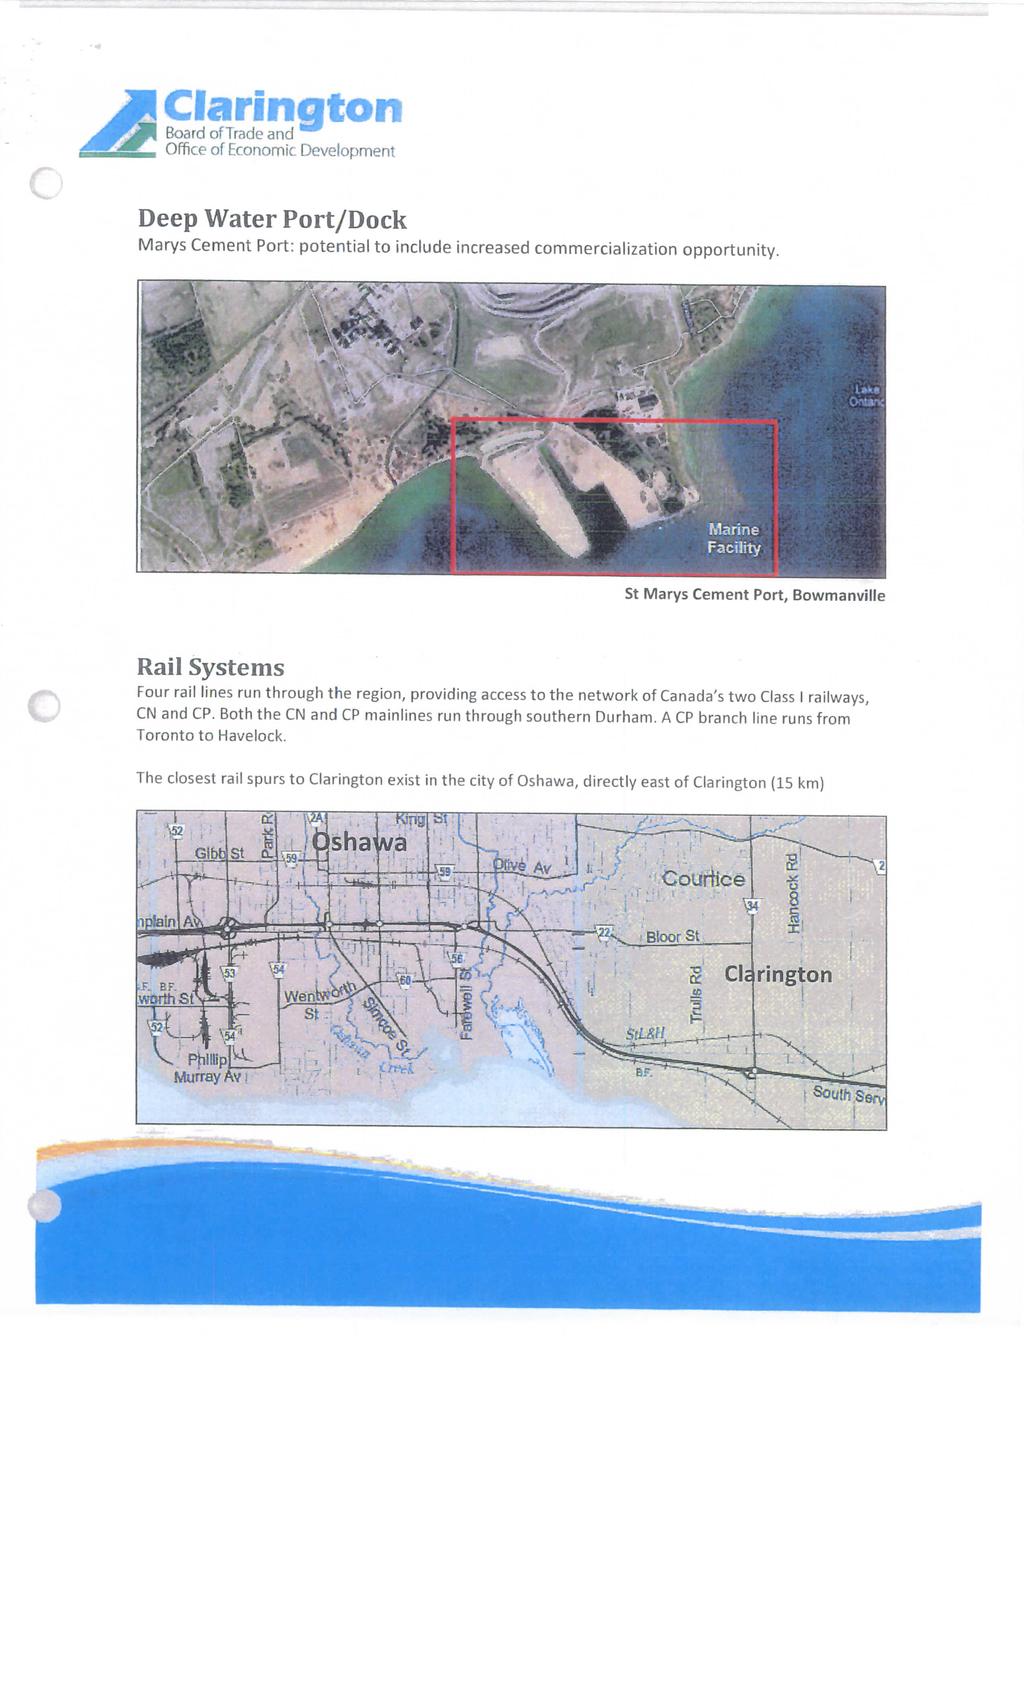 Board of Trade and * Deep Water Port/Dock Marys Cement Port: potential to include increased commercialization opportunity.